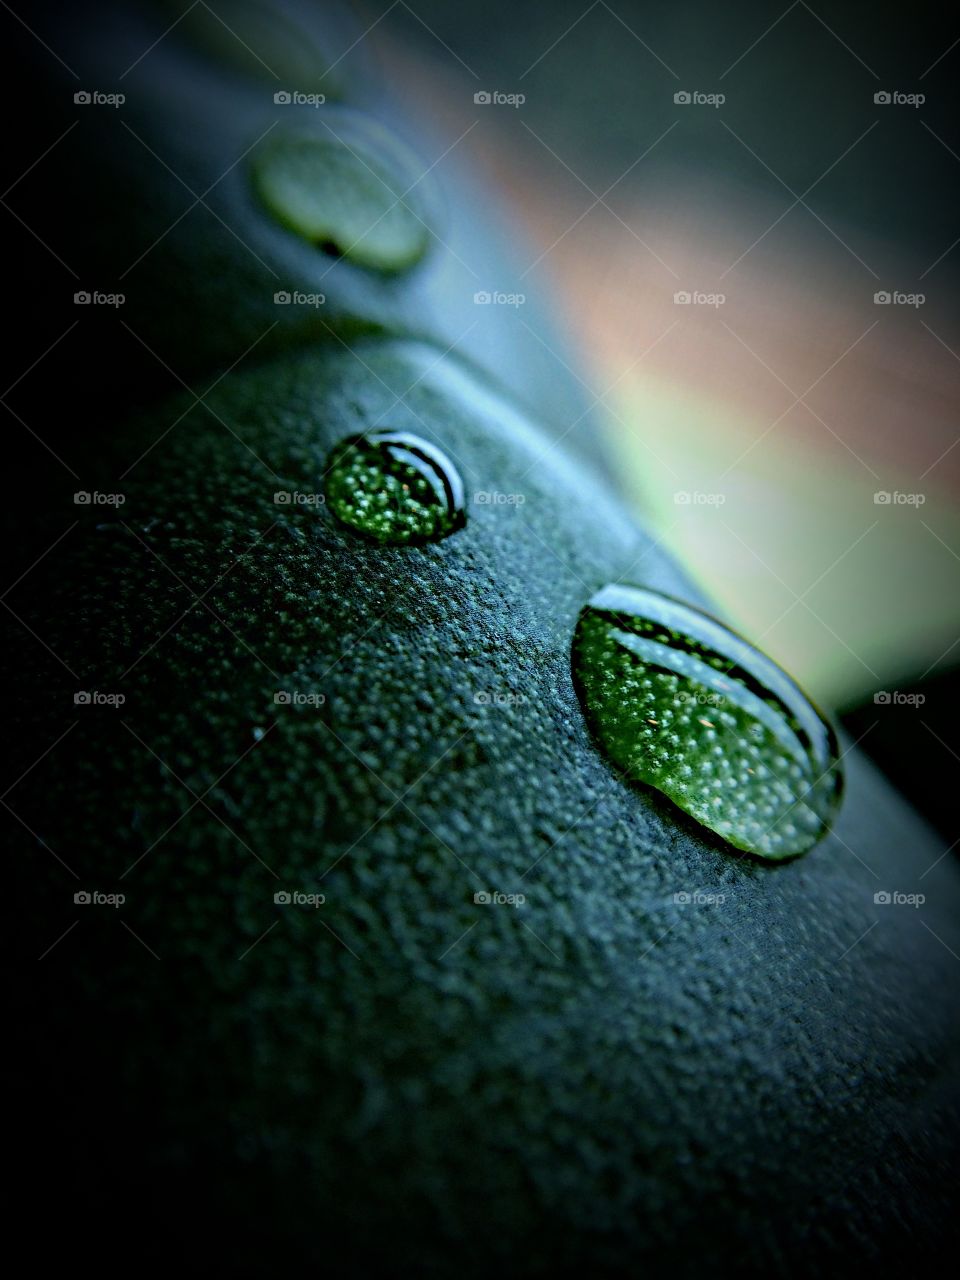 Water droplets close up 